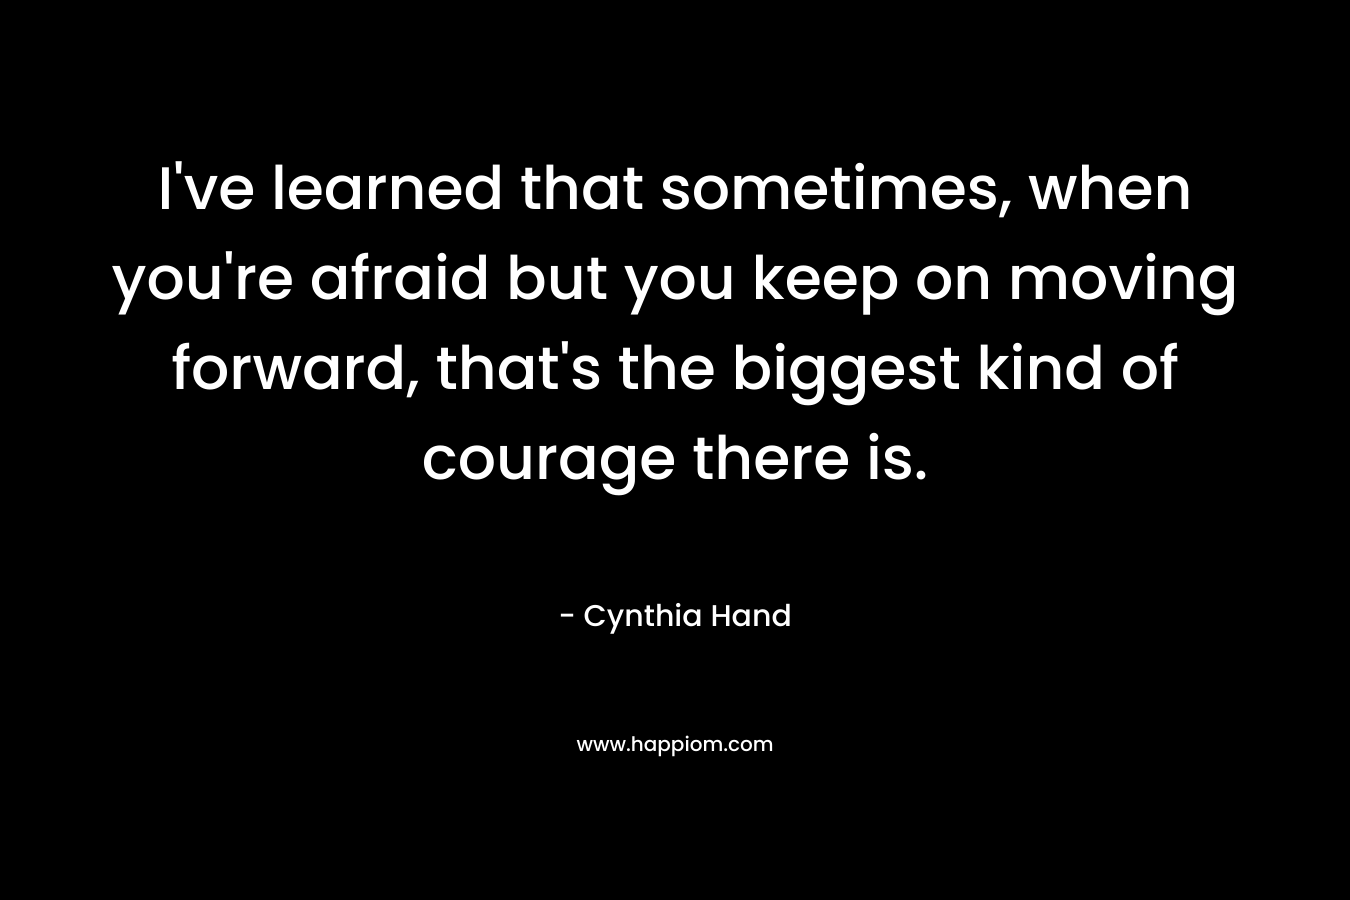 I've learned that sometimes, when you're afraid but you keep on moving forward, that's the biggest kind of courage there is.